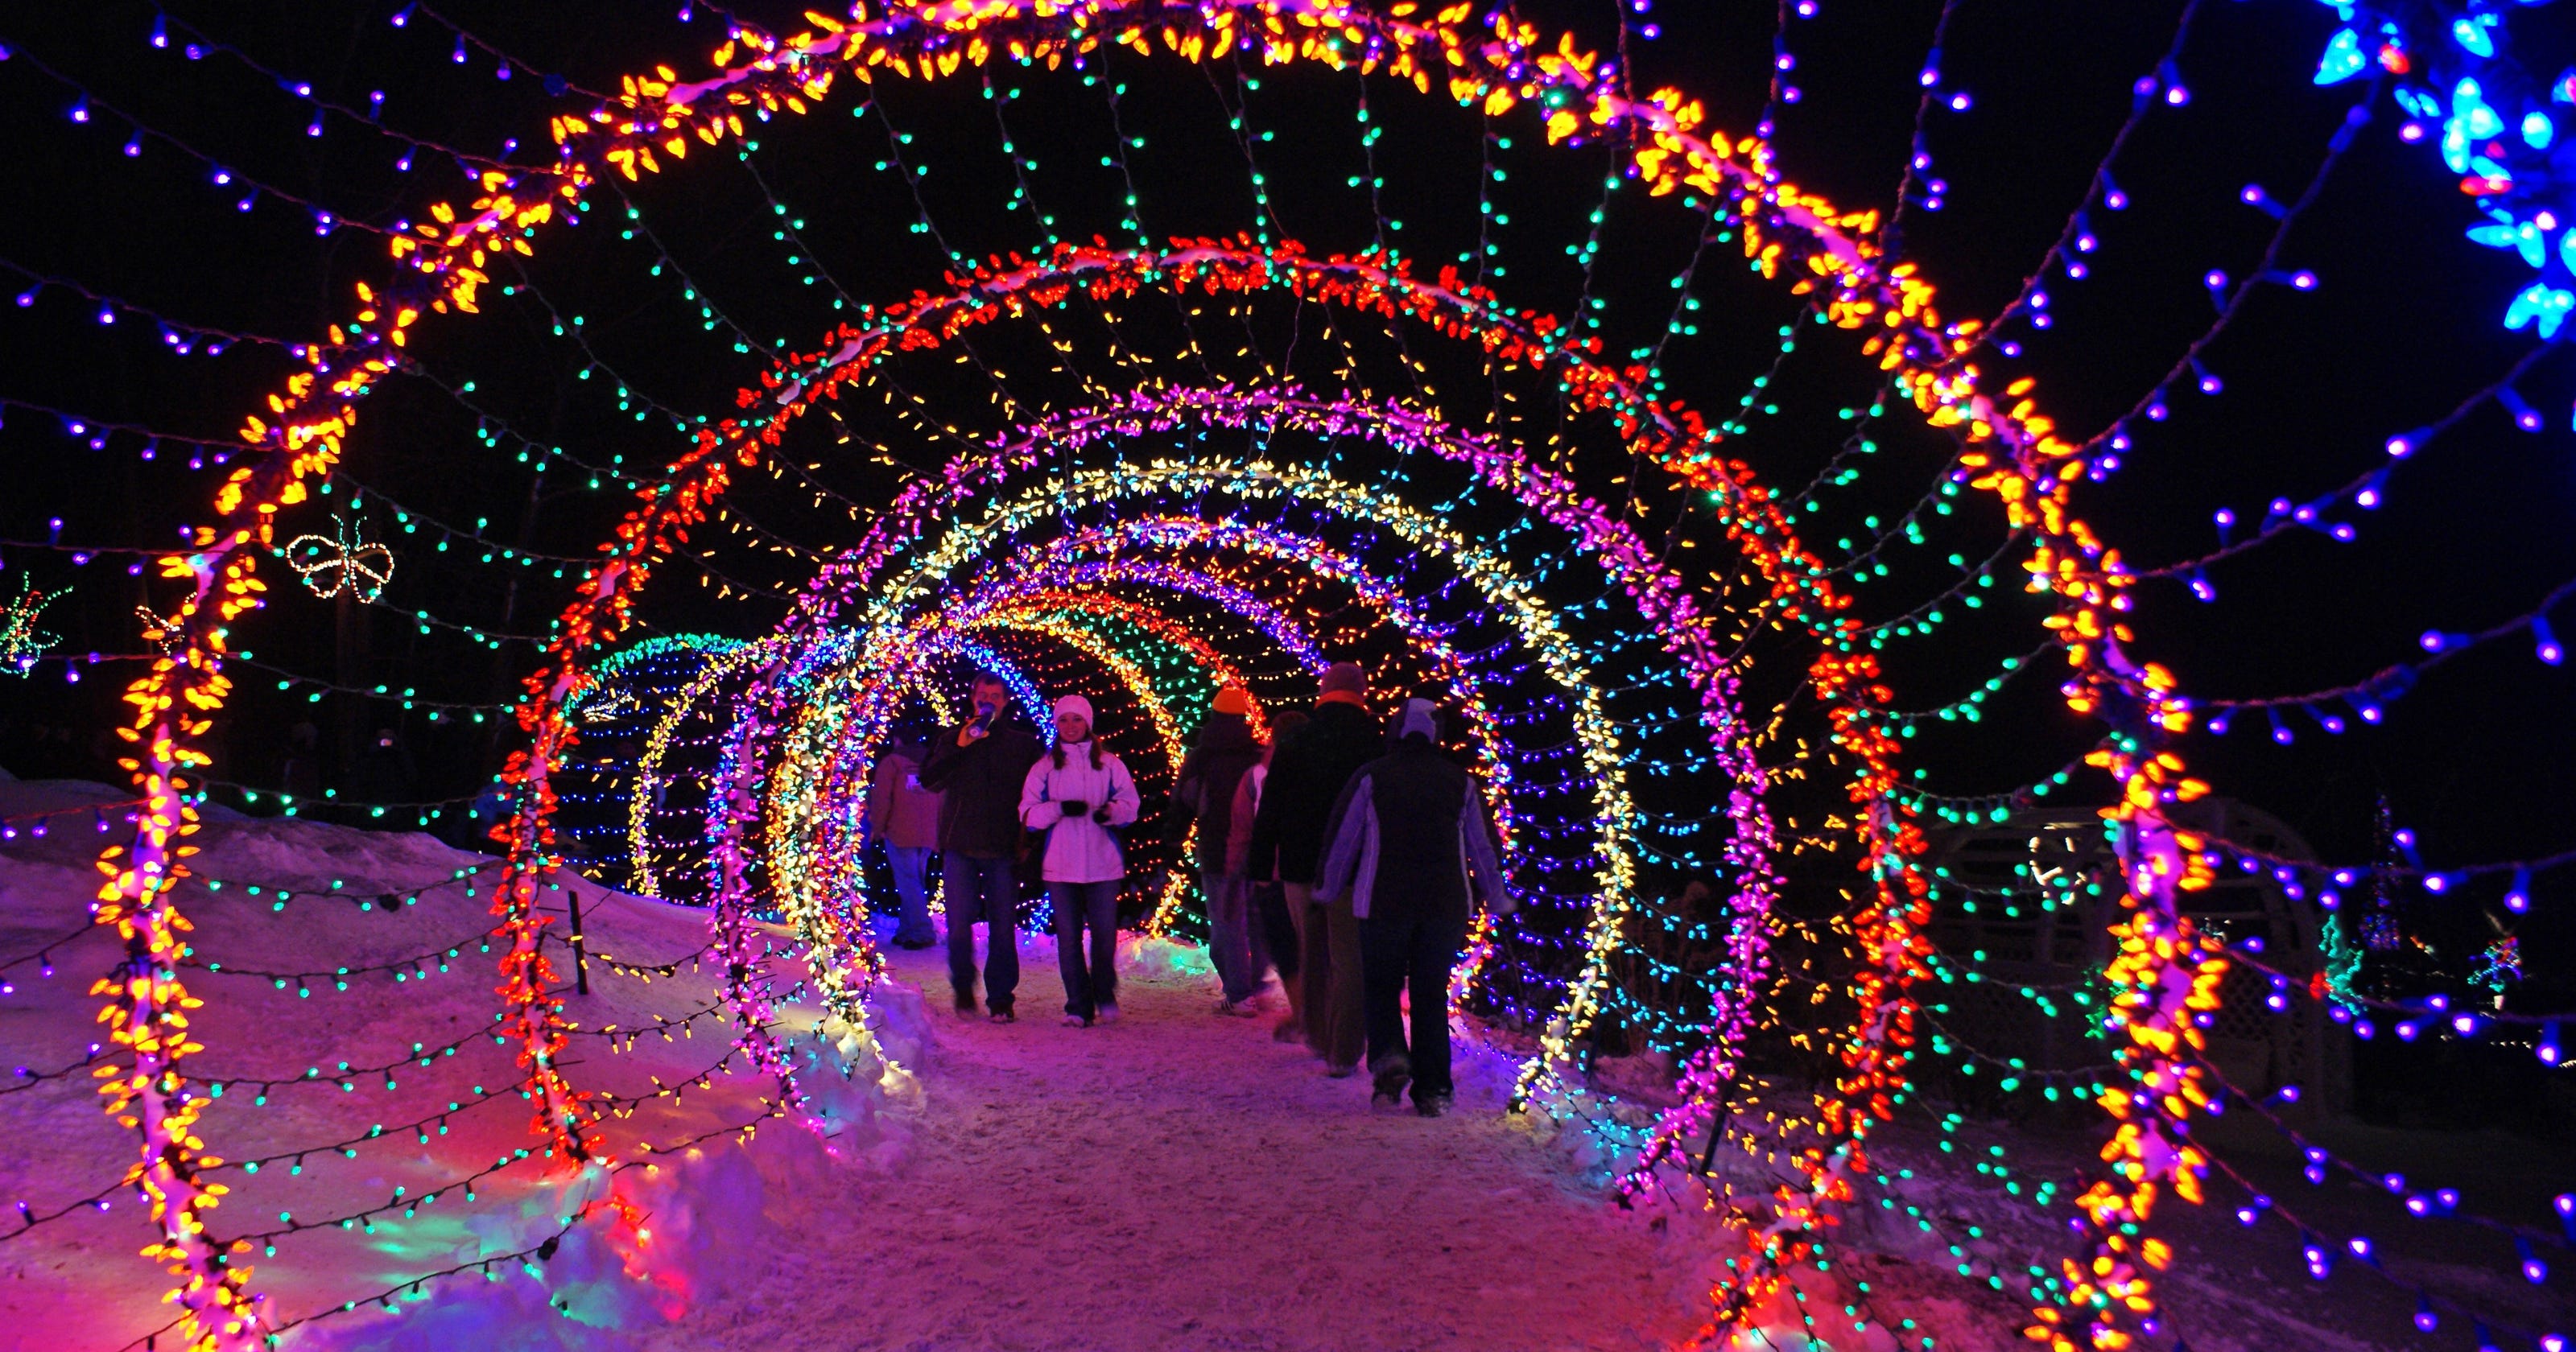 Holiday lights 6 of Wisconsin’s most dazzling shows